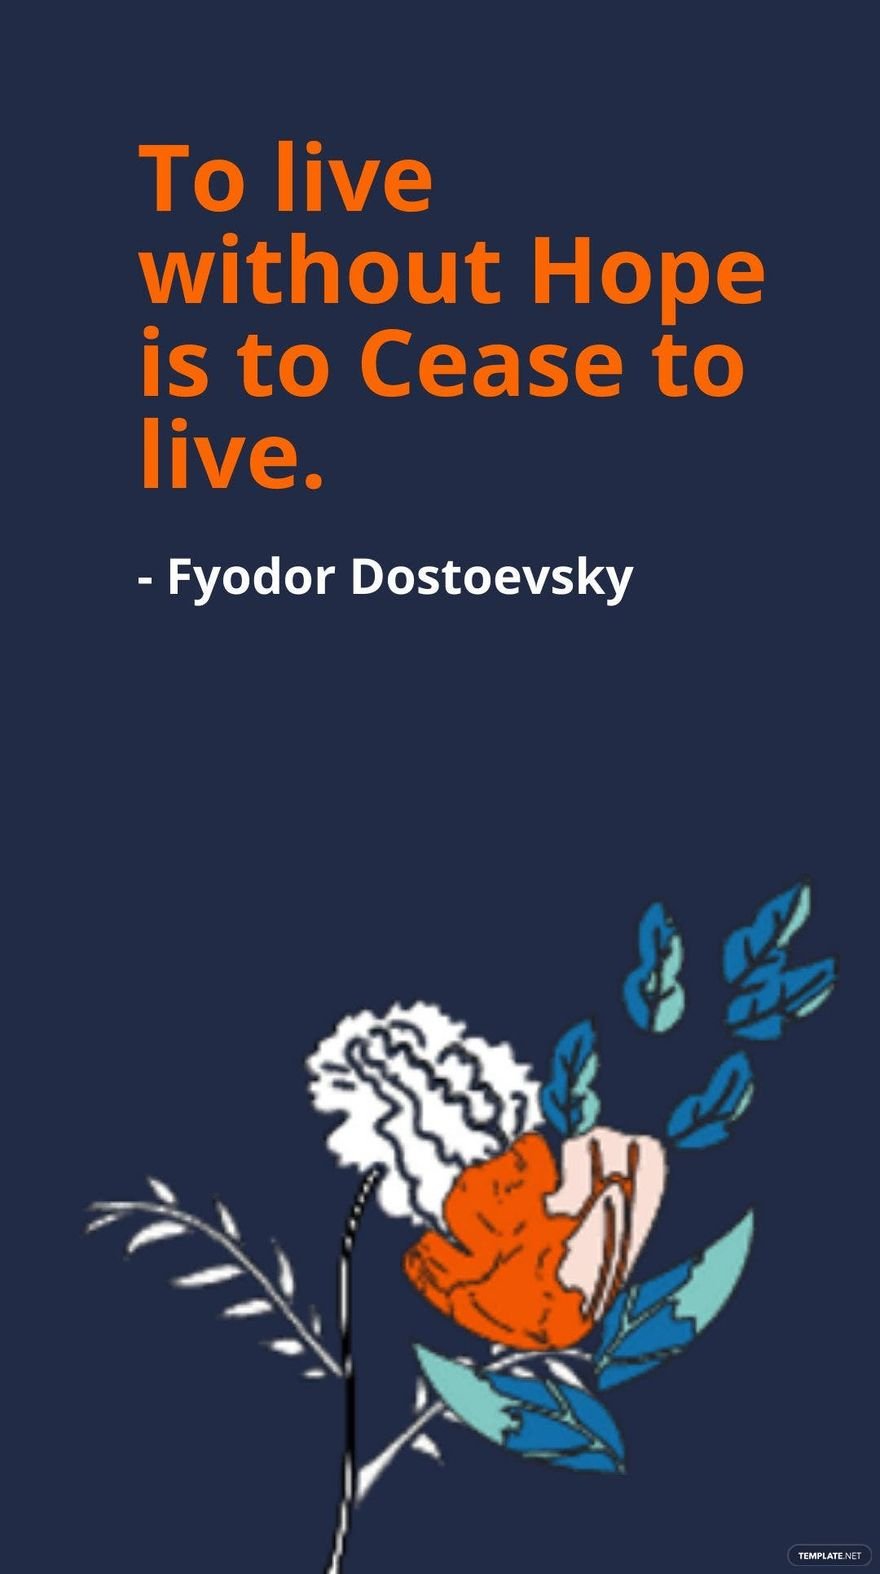 Free Fyodor Dostoevsky - To live without Hope is to Cease to live. in JPG